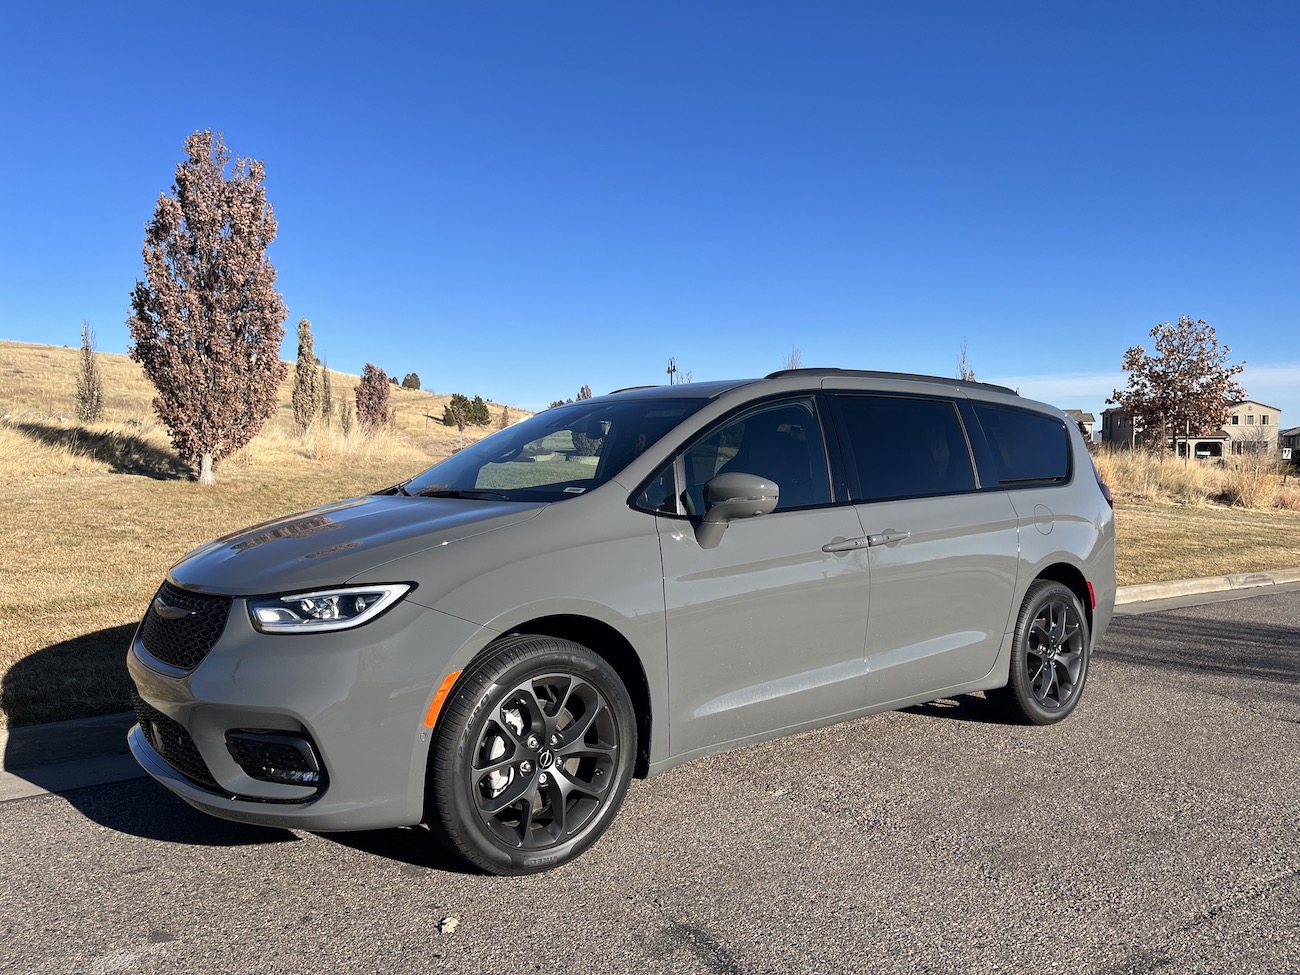 2022 Chrysler Pacifica: The Hybrid Version Is the Better Way to Go